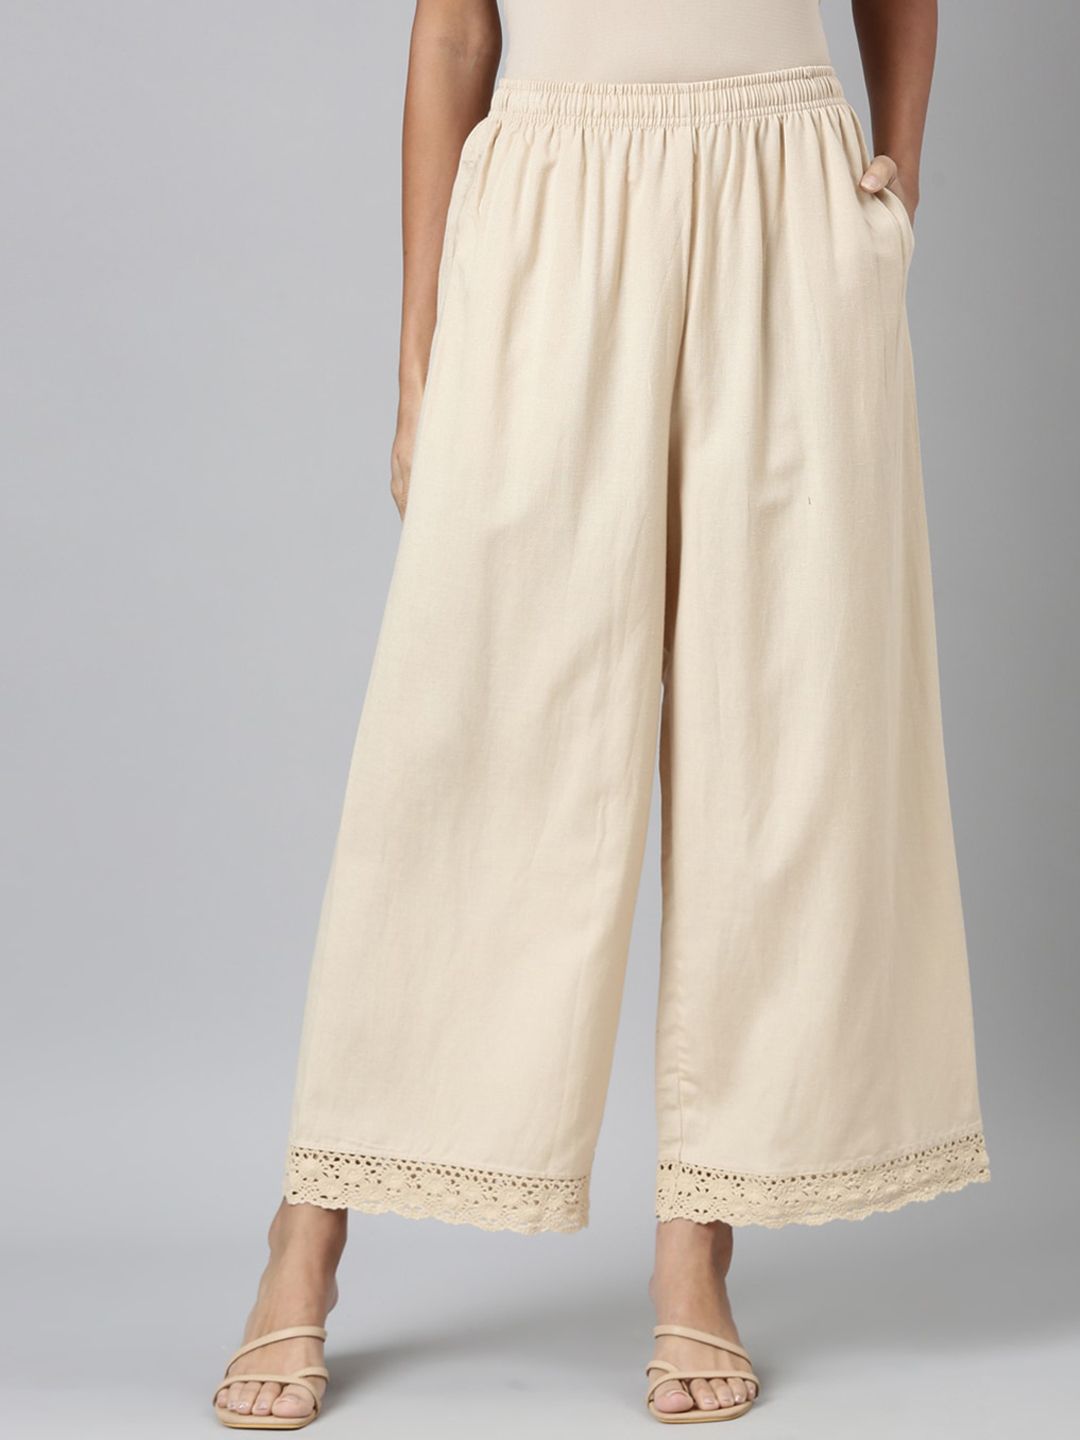 Go Colors Women Beige Trousers Price in India